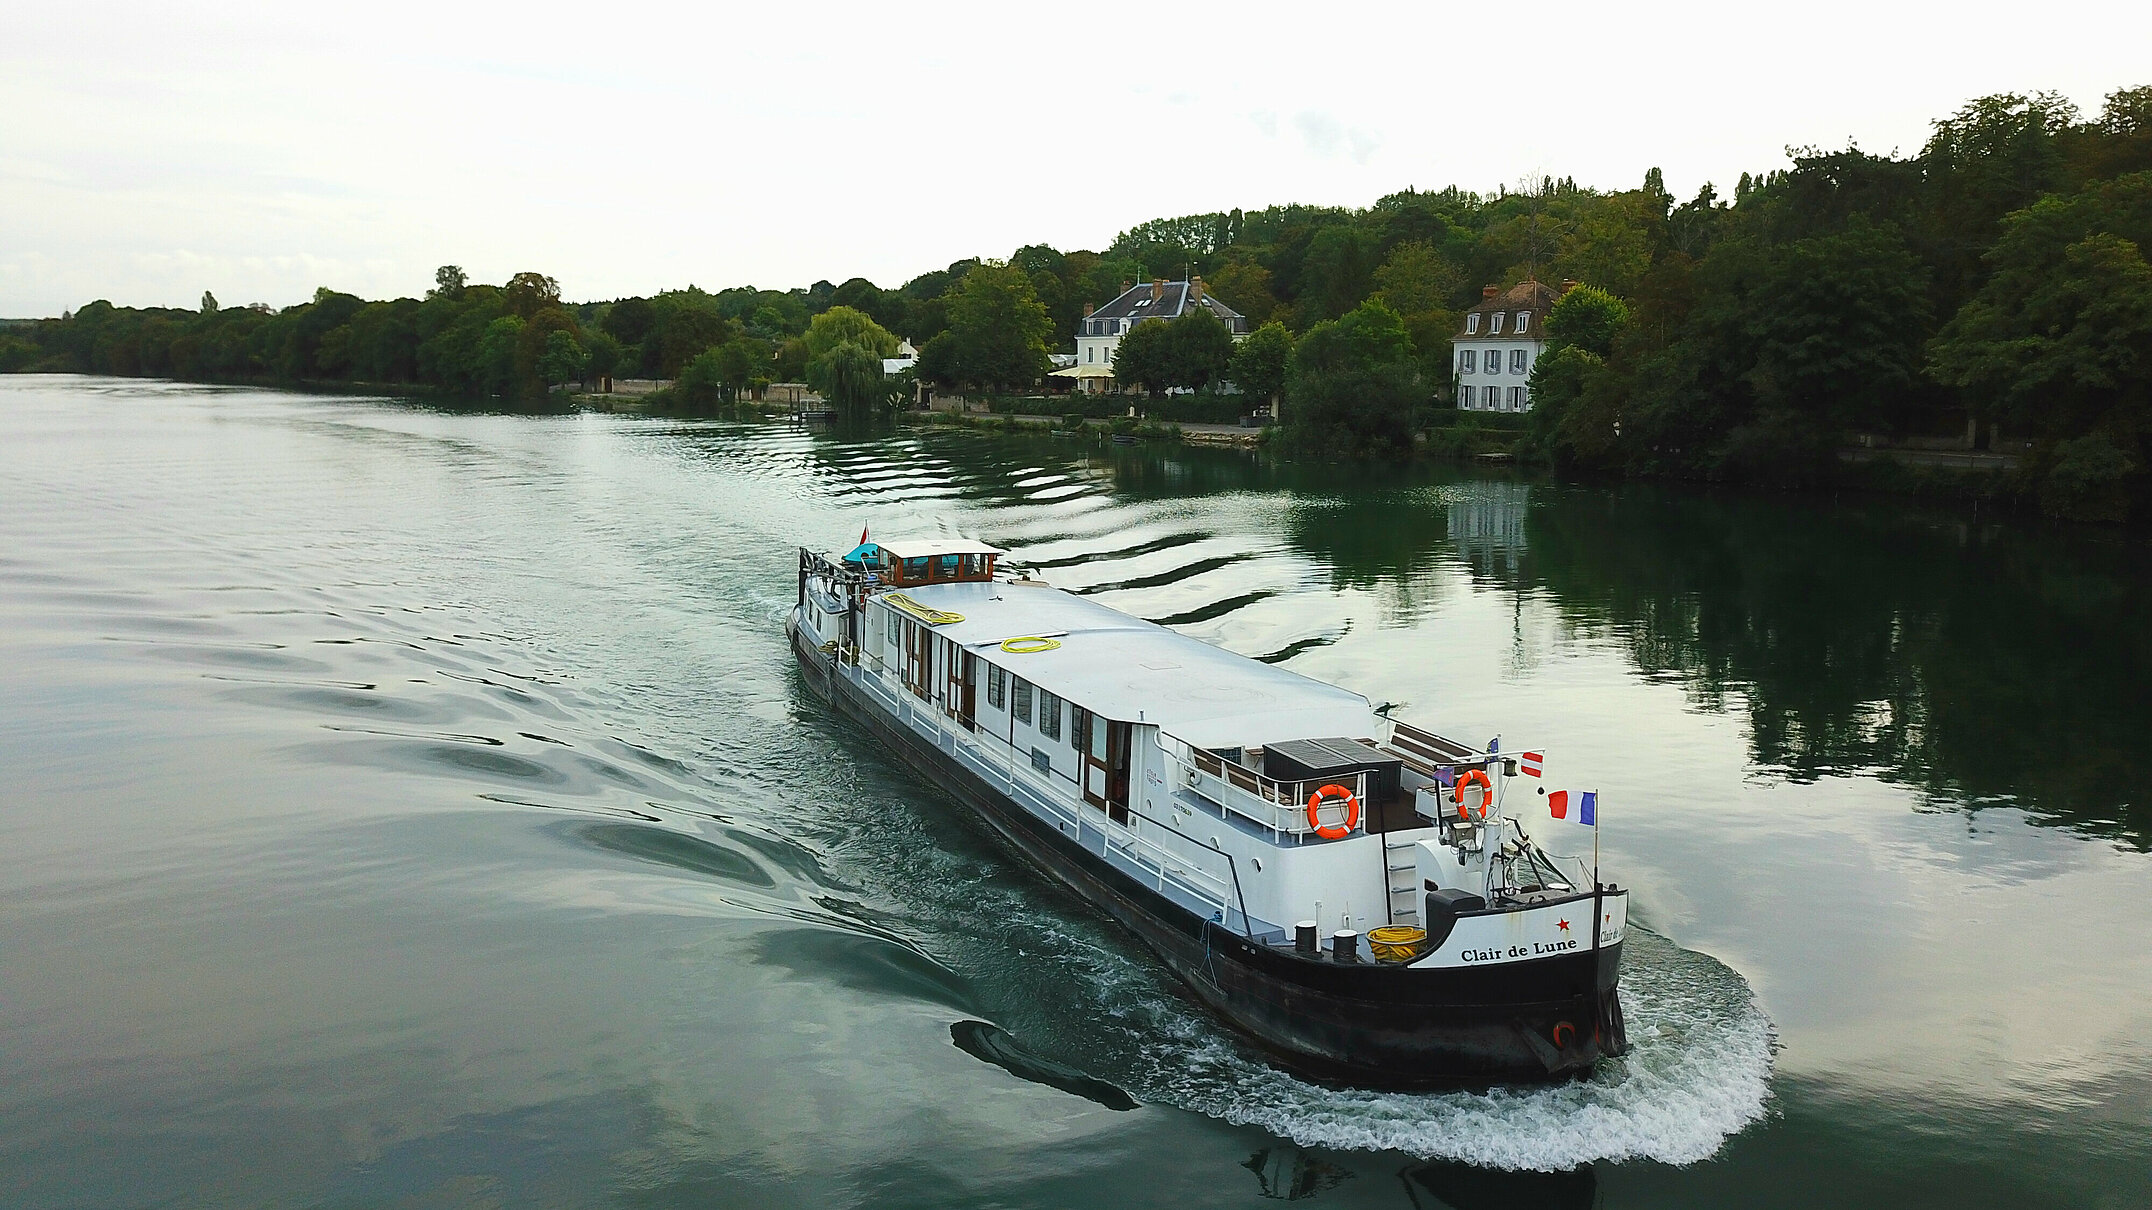 Cycletours Holidays Barges Clair de Lune on River